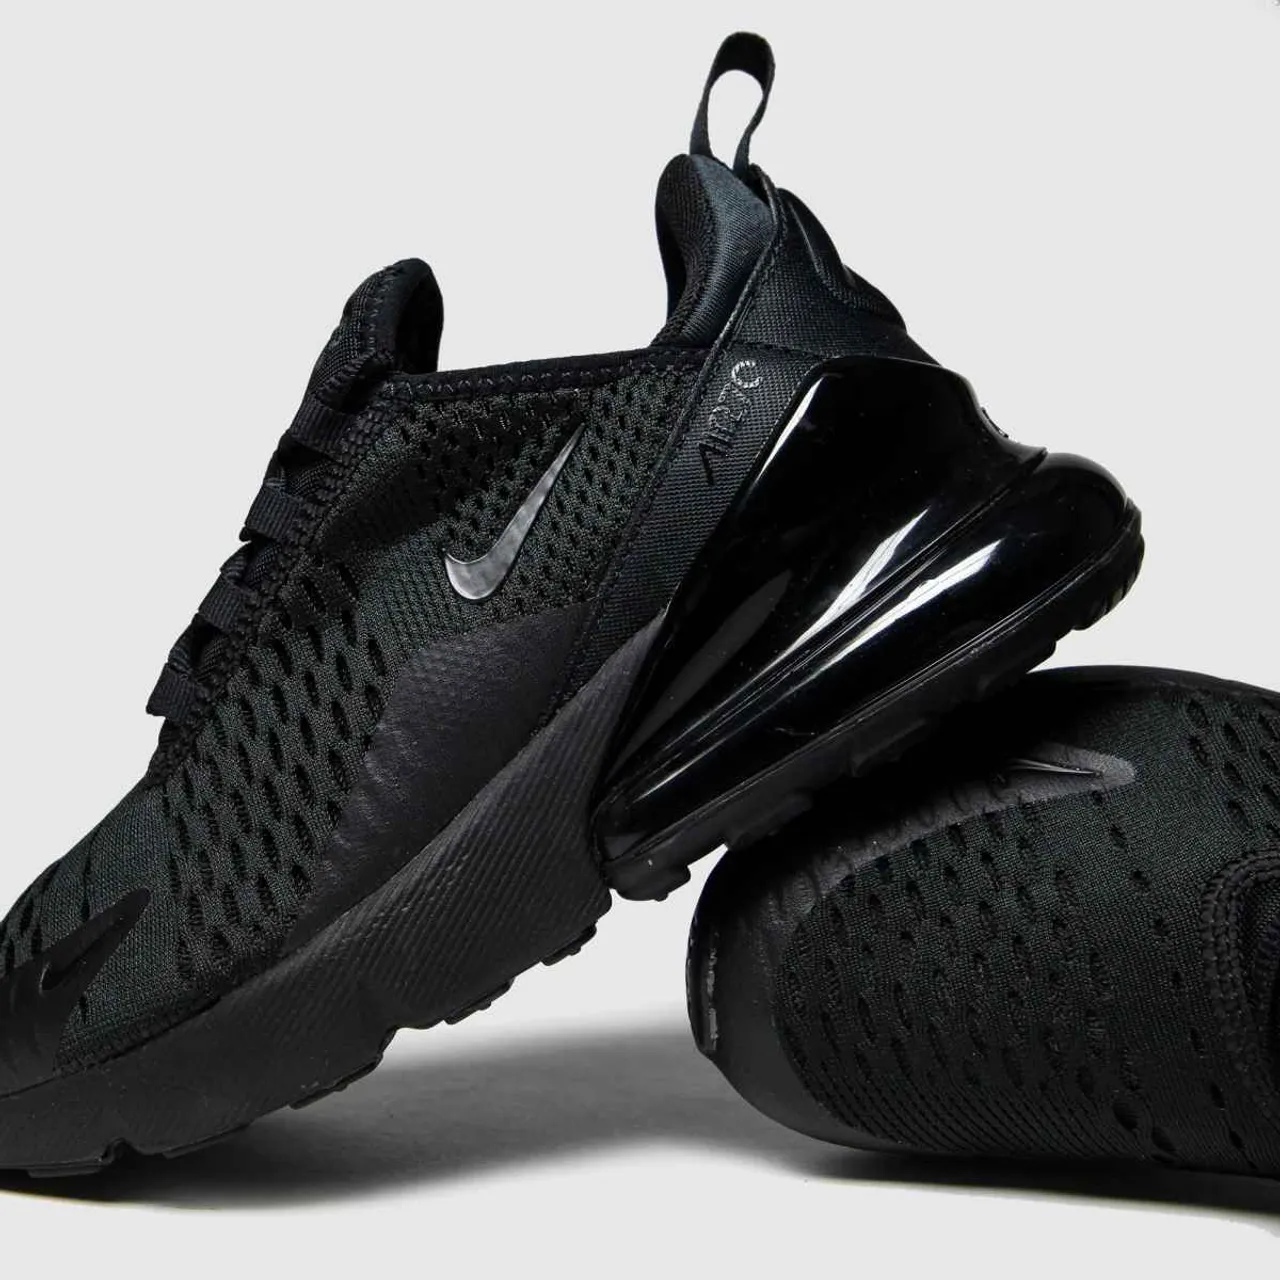 Nike Black Air Max 270 Youth Trainers